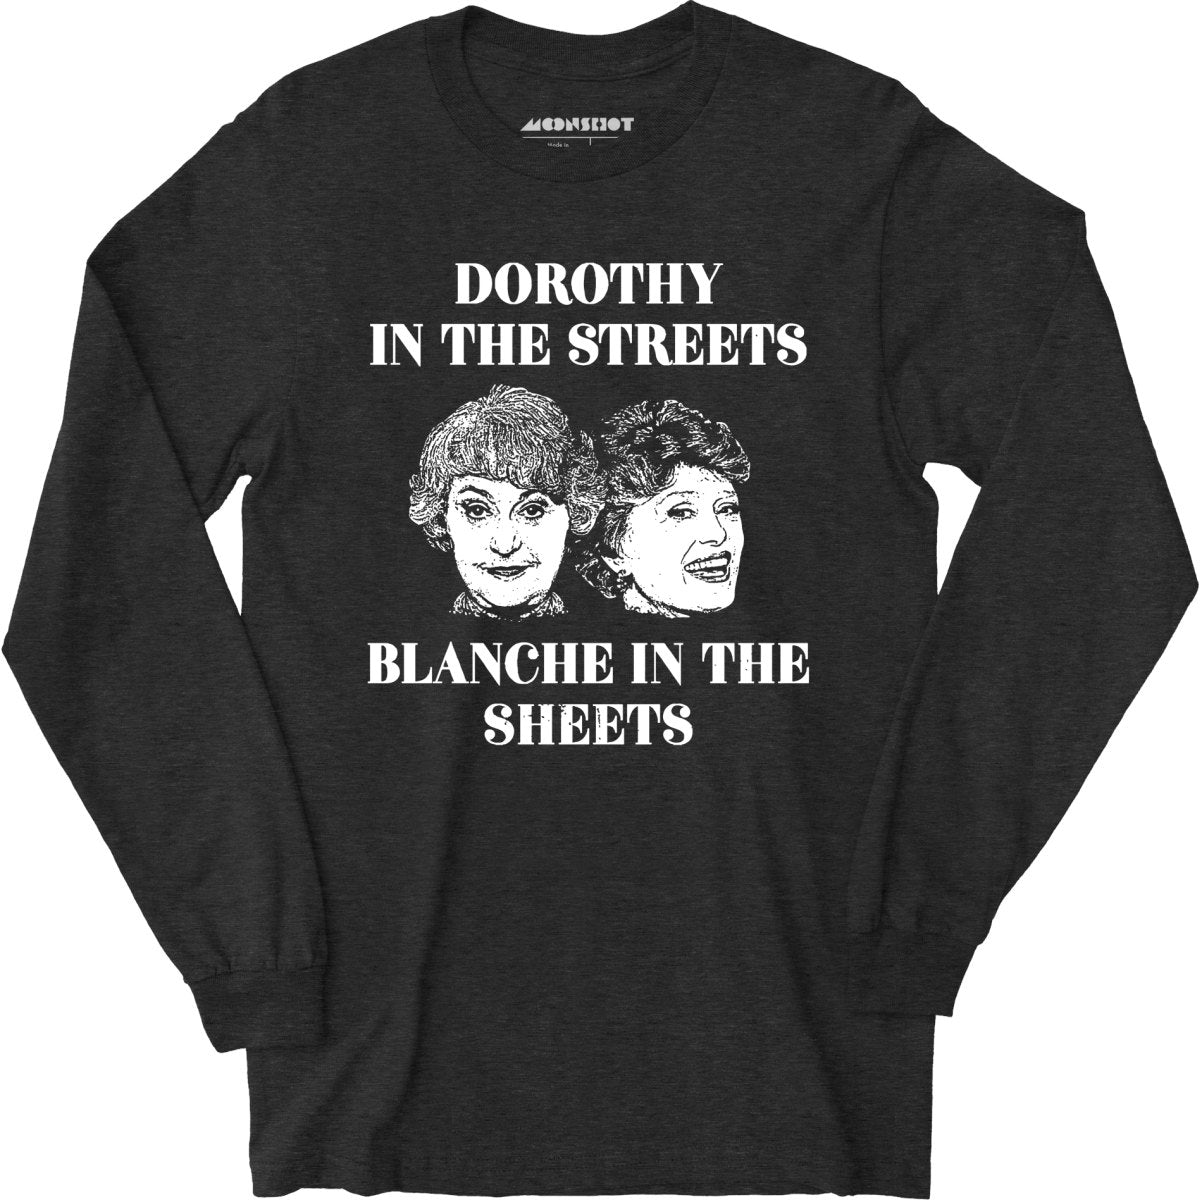 Dorothy in the Streets Blanche in the Sheets - Long Sleeve T-Shirt